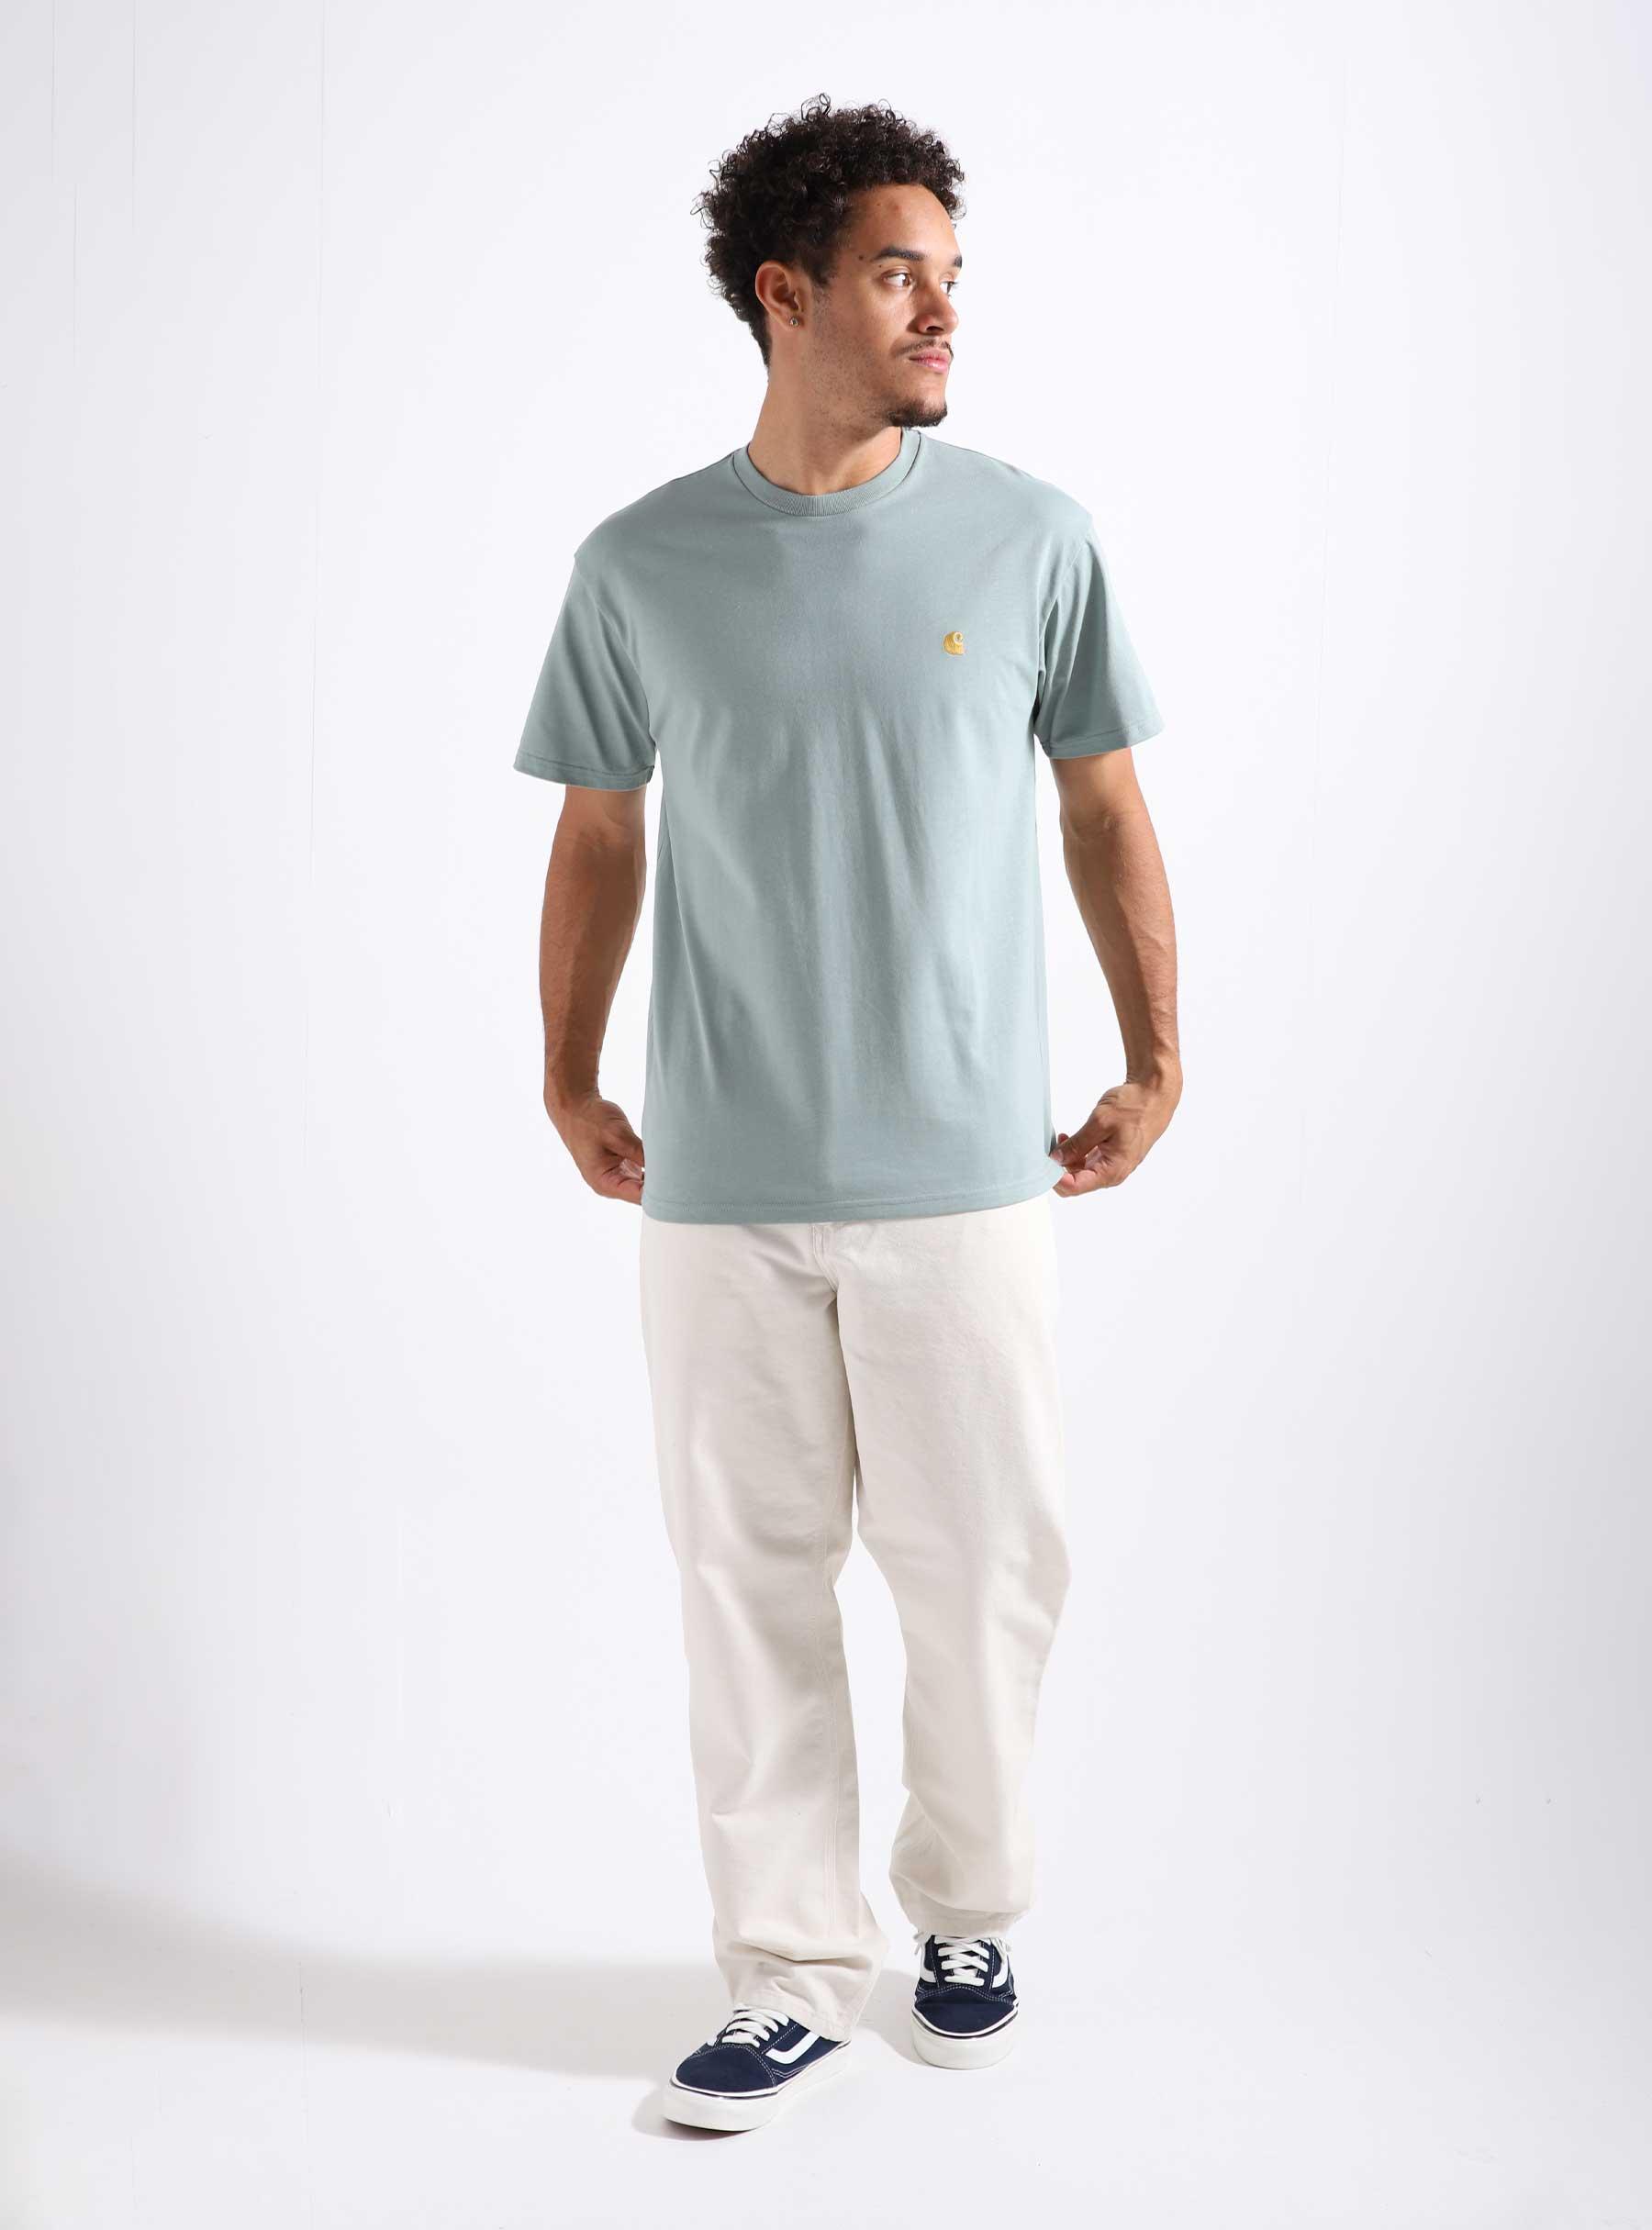 Chase T-Shirt Glassy Teal Gold I026391-1R1XX